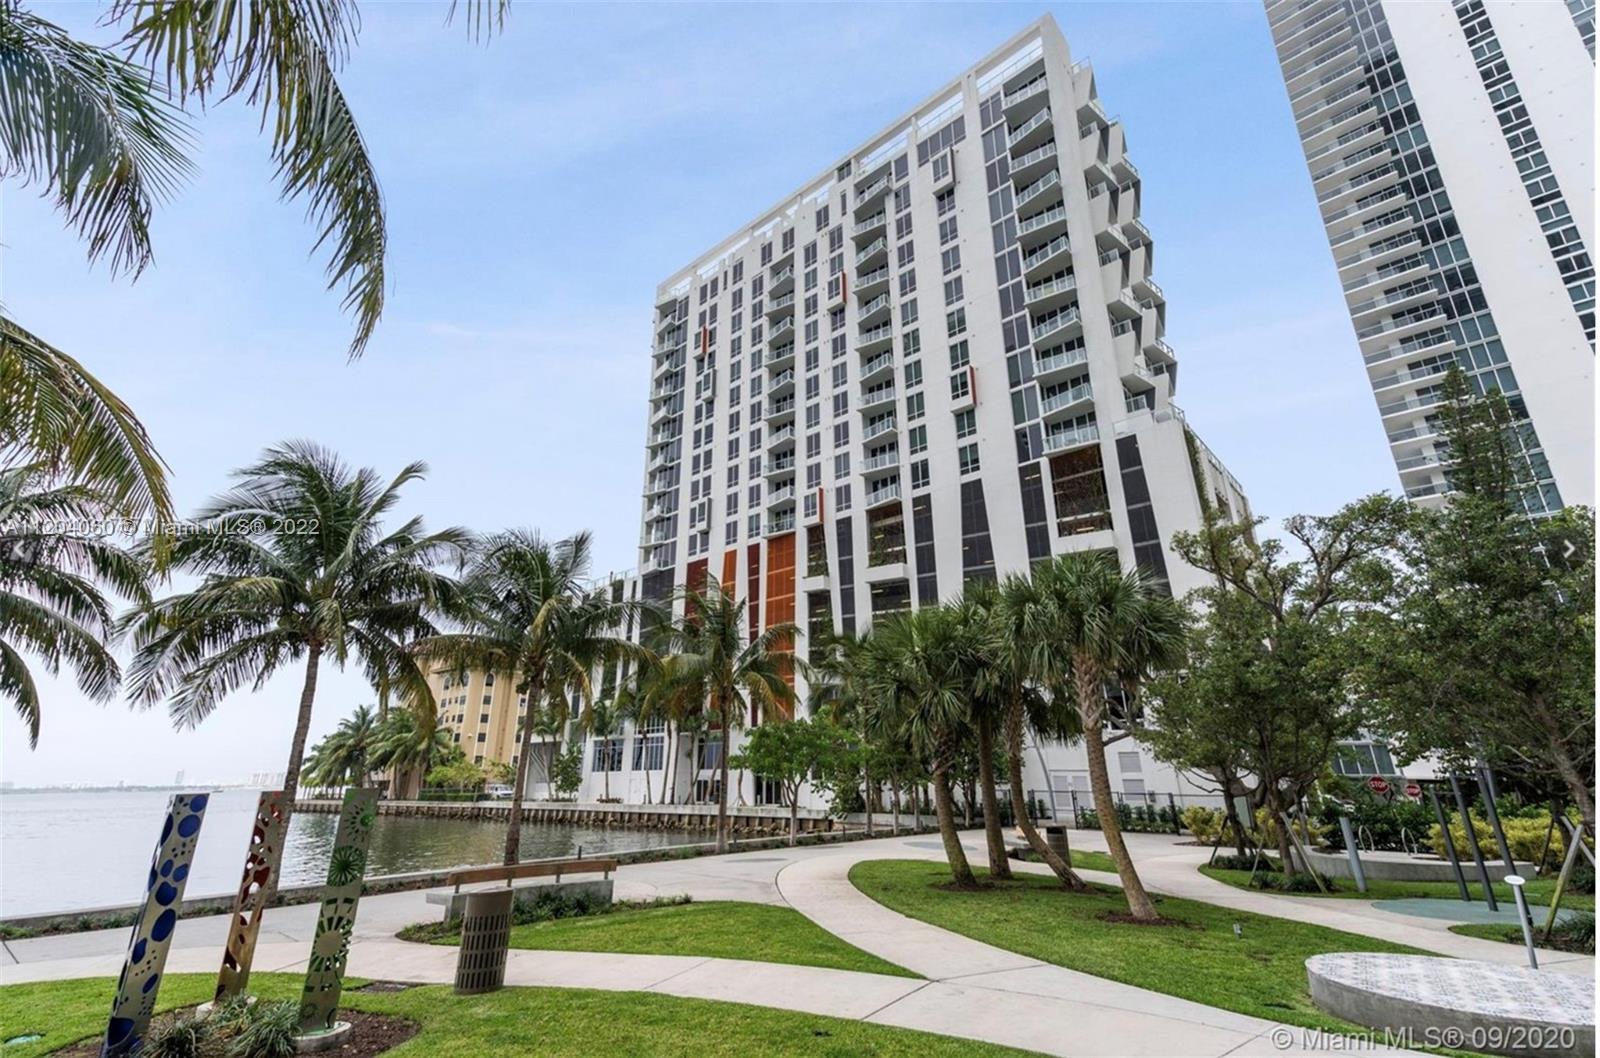 Boutique Building 94 units, 2beds/2baths, at intercostal , Amazing bay views, great amenities, Pool,